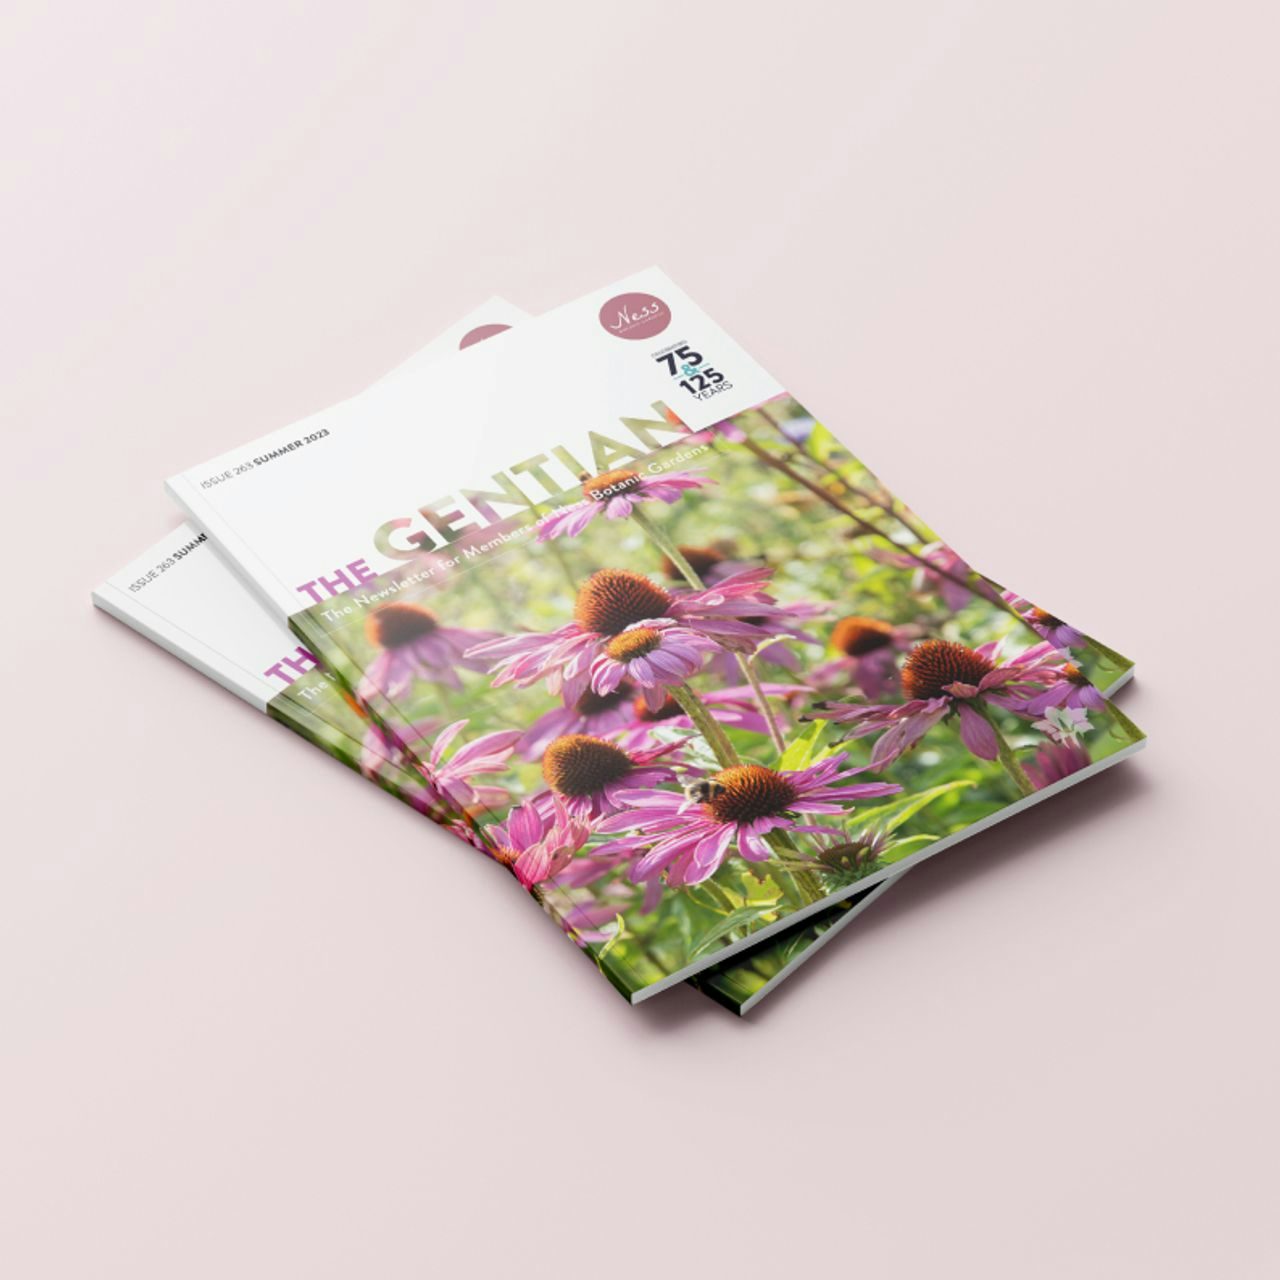 Stack of 'The Gentian' magazines with pink Echinacea flowers on the cover, on a soft pink background.